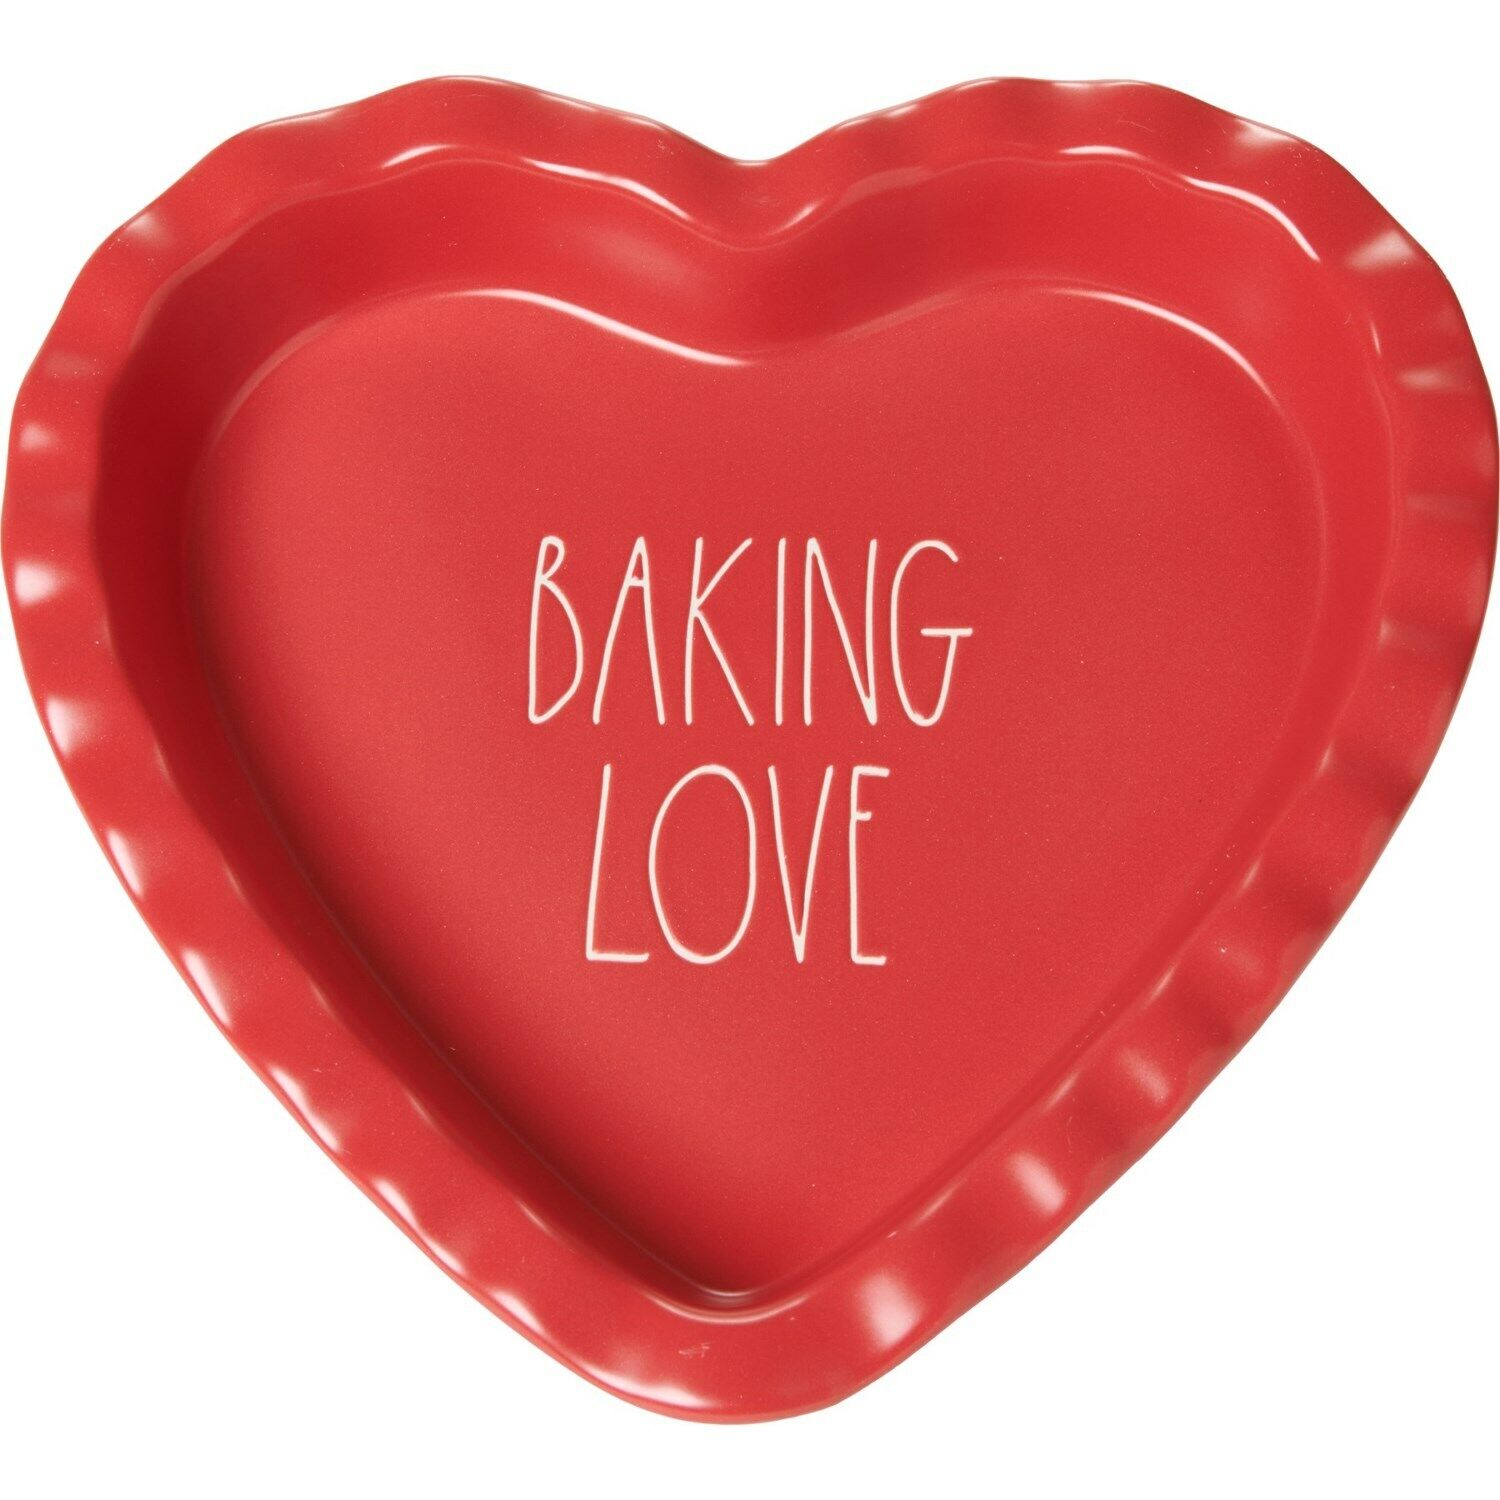 NEW Rae Dunn Baking Love Red Heart Dish Valentines Day Collectible 